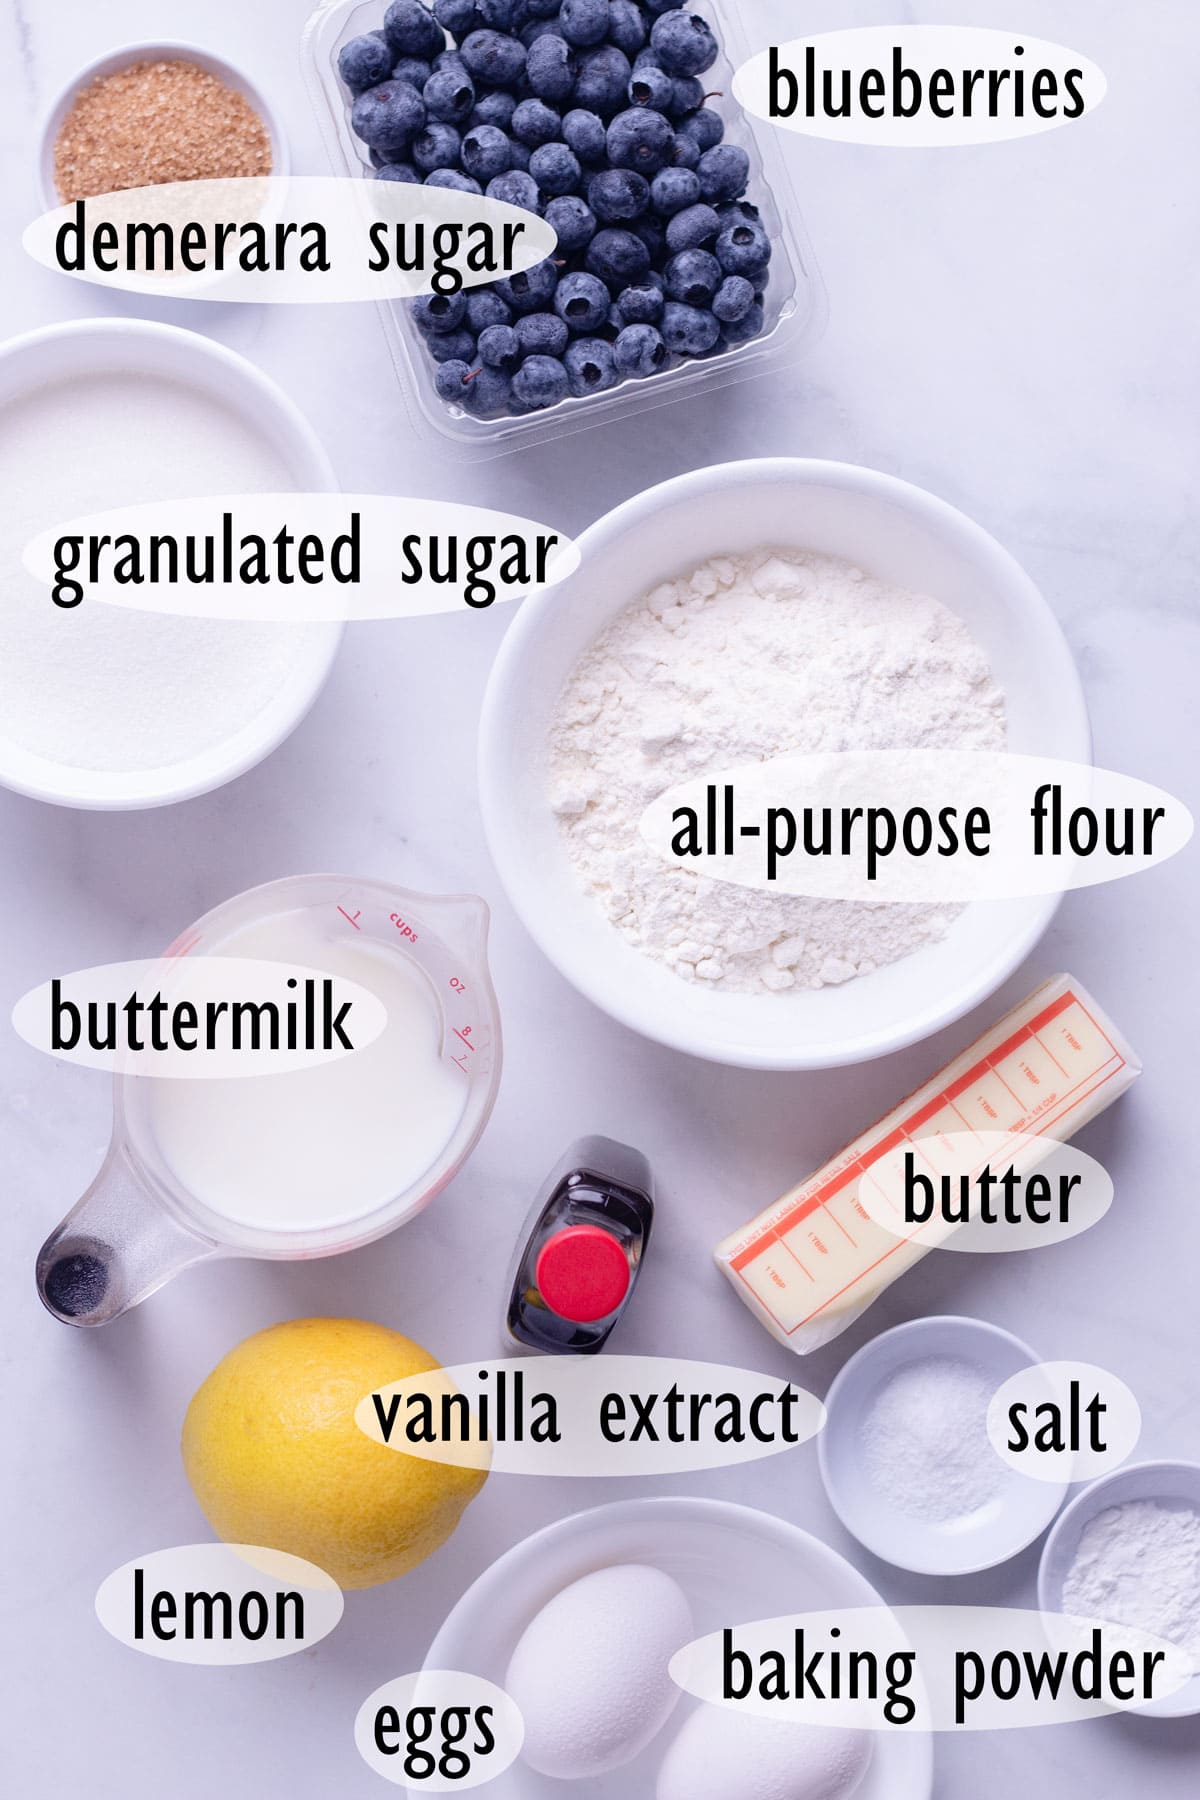 Overhead view of ingredients for blueberry muffins, including flour, buttermilk, butter, sugar and eggs.